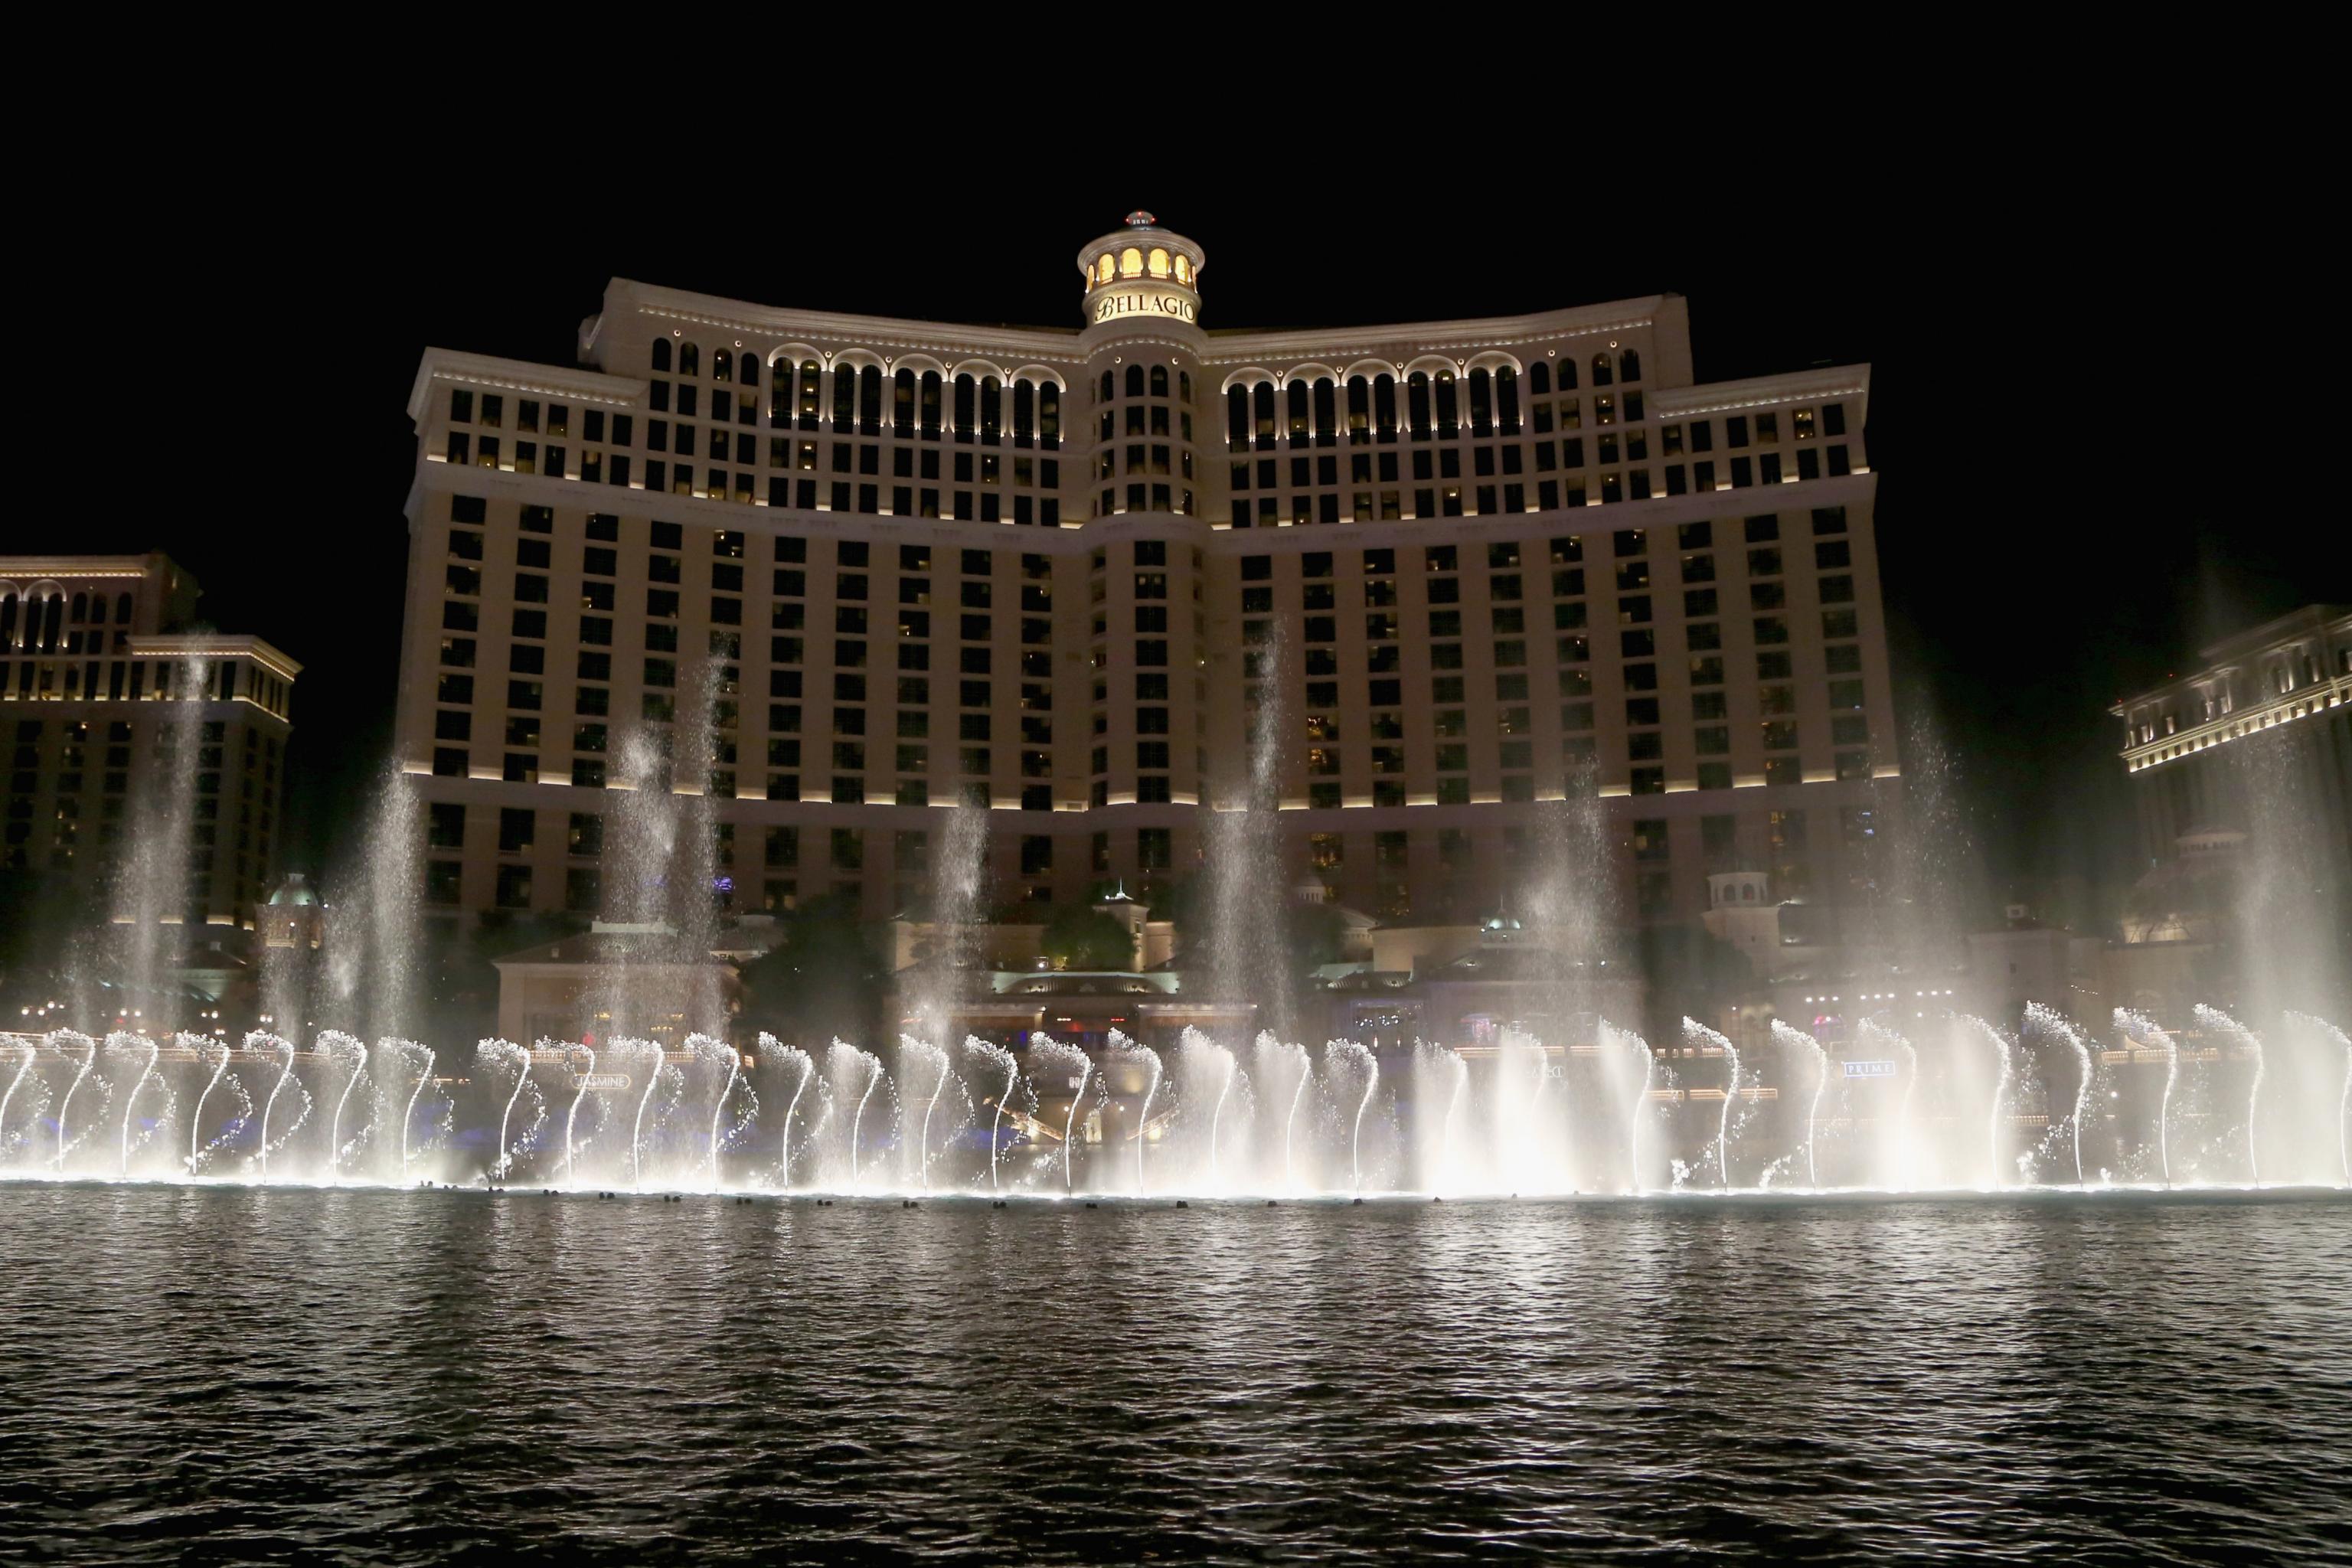 Fountain of Information: NFL Draft Broadcast Stages, Bellagio Las Vegas